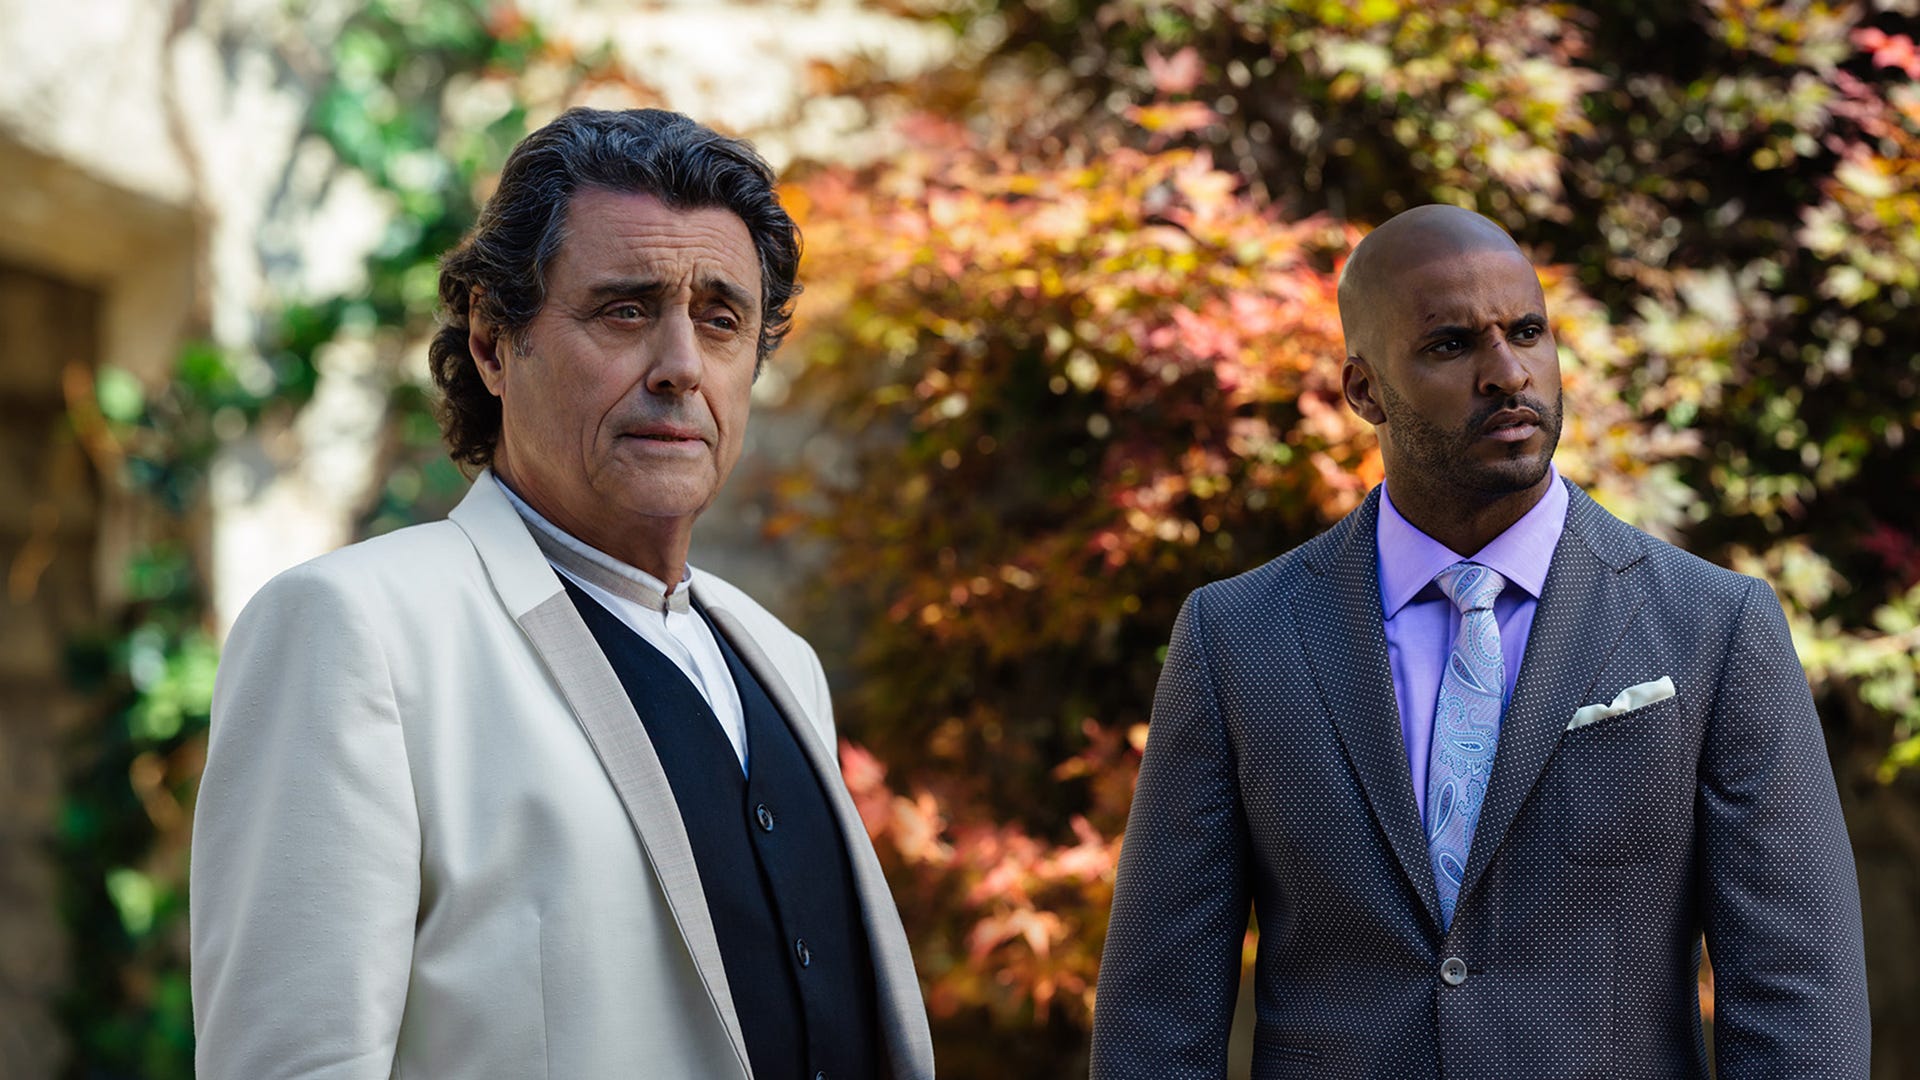 Ian McShane and Ricky Whittle, American Gods